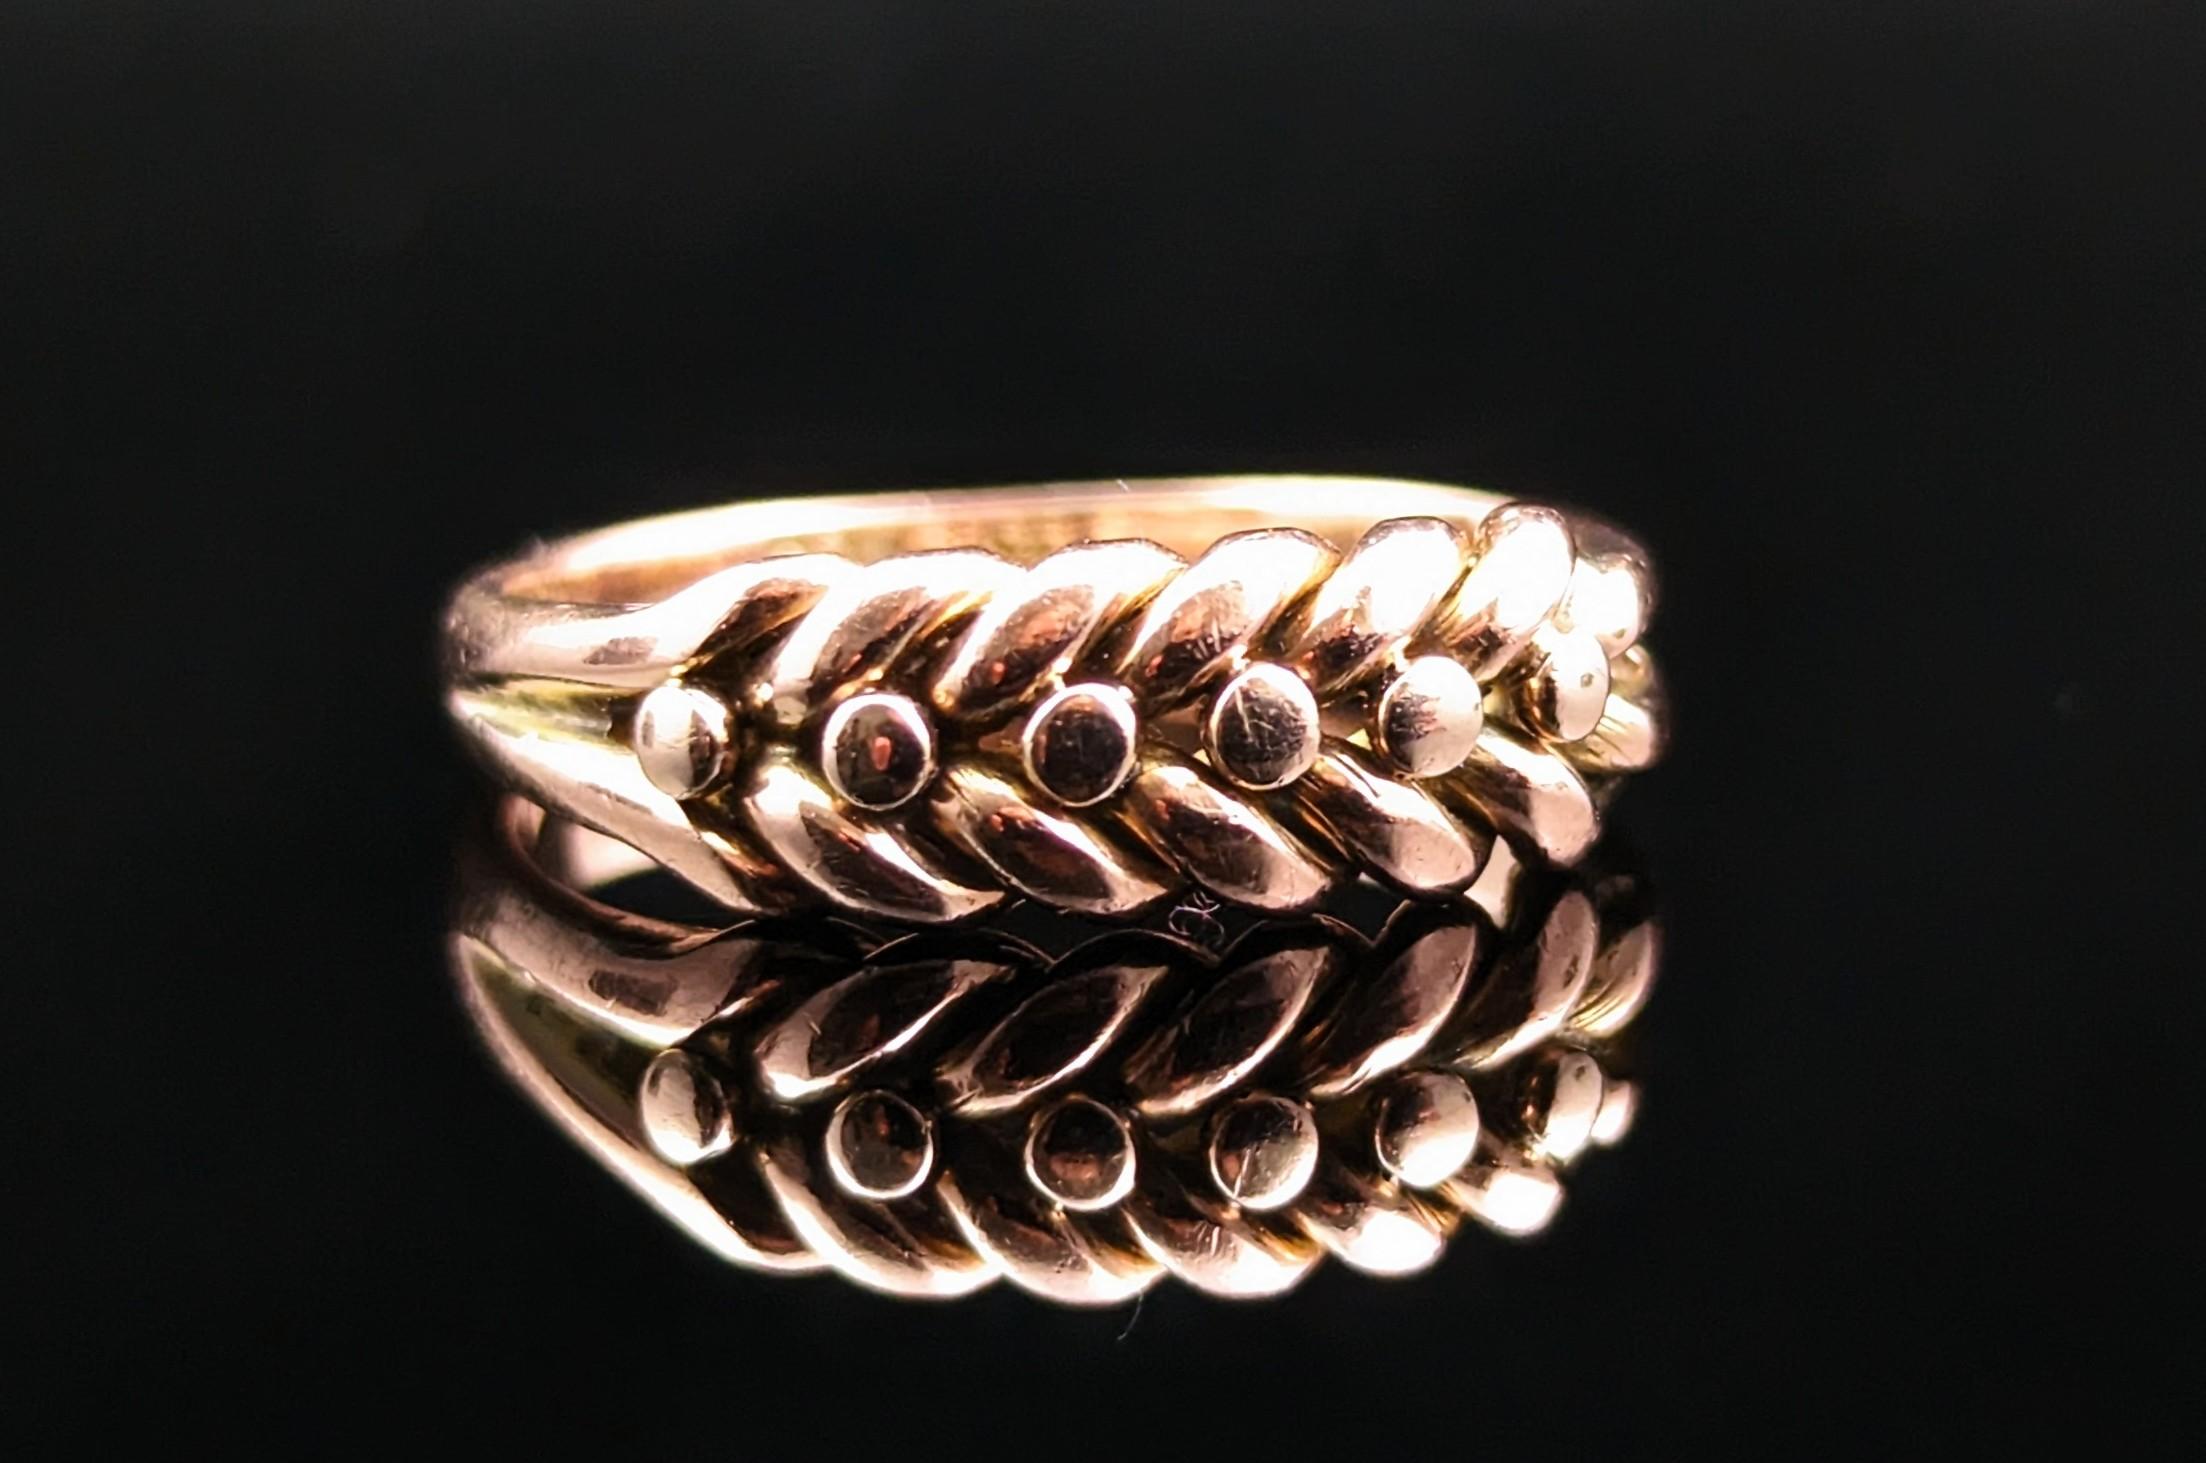 The keeper ring is a classic and highly sought after ring style, this antique Victorian era keeper ring is one of our favourites.

The face is made up from a scrolling knot with beading and this leads to the bifurcated shoulders and smooth chunky